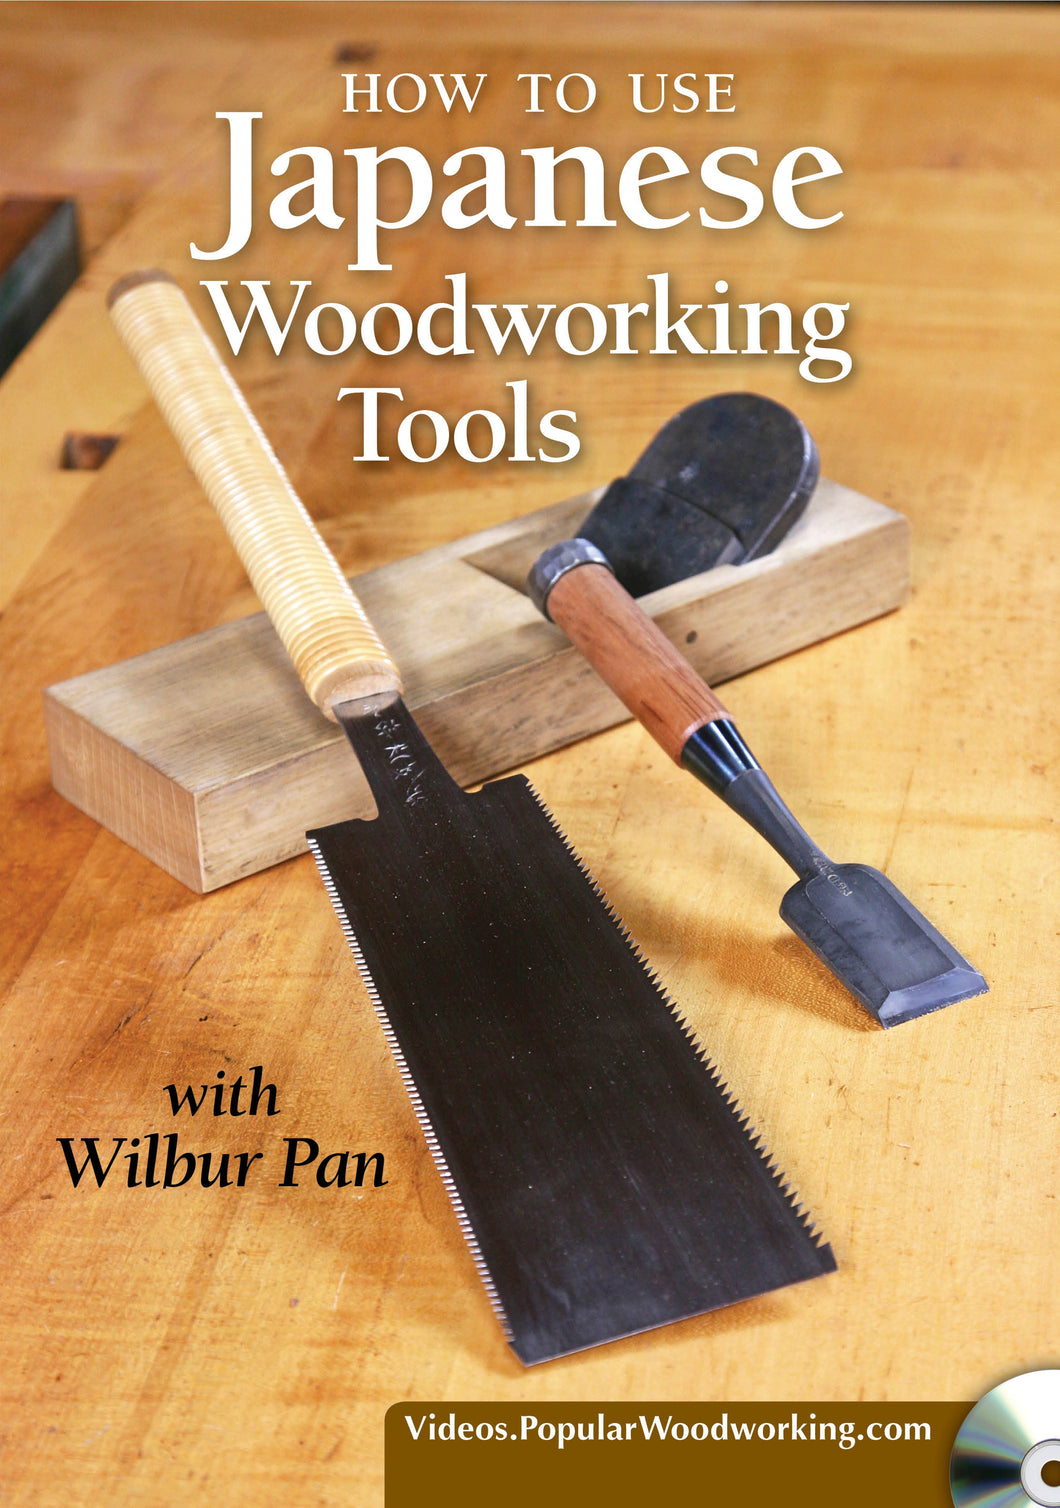 How to Use Japanese Woodworking Tools Video Download